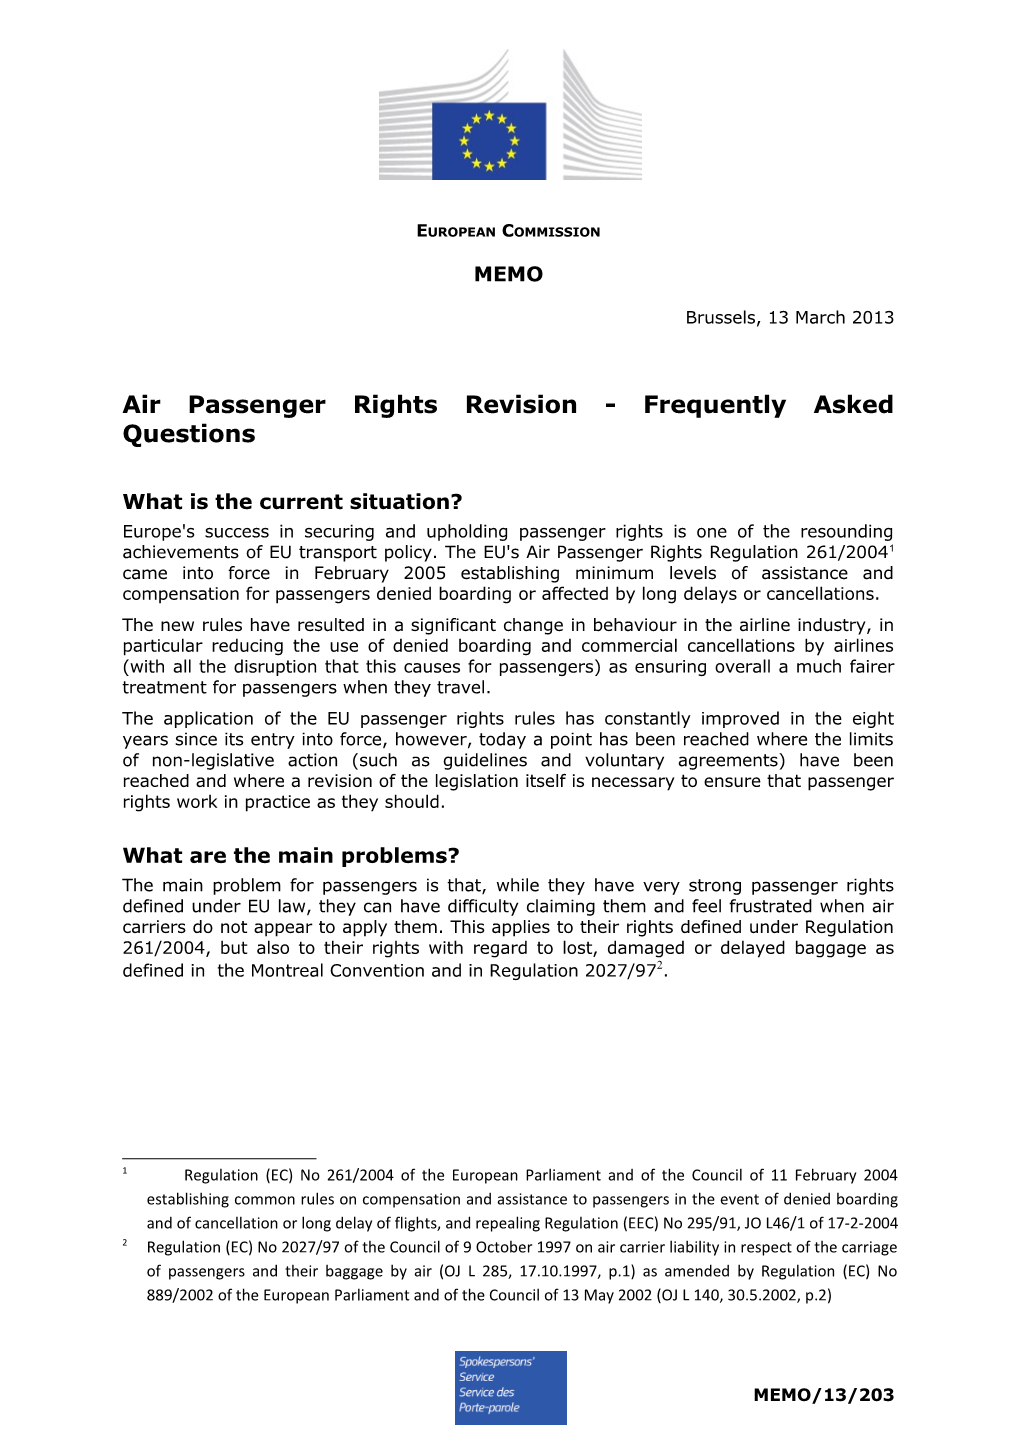 Air Passenger Rights Revision - Frequently Asked Questions